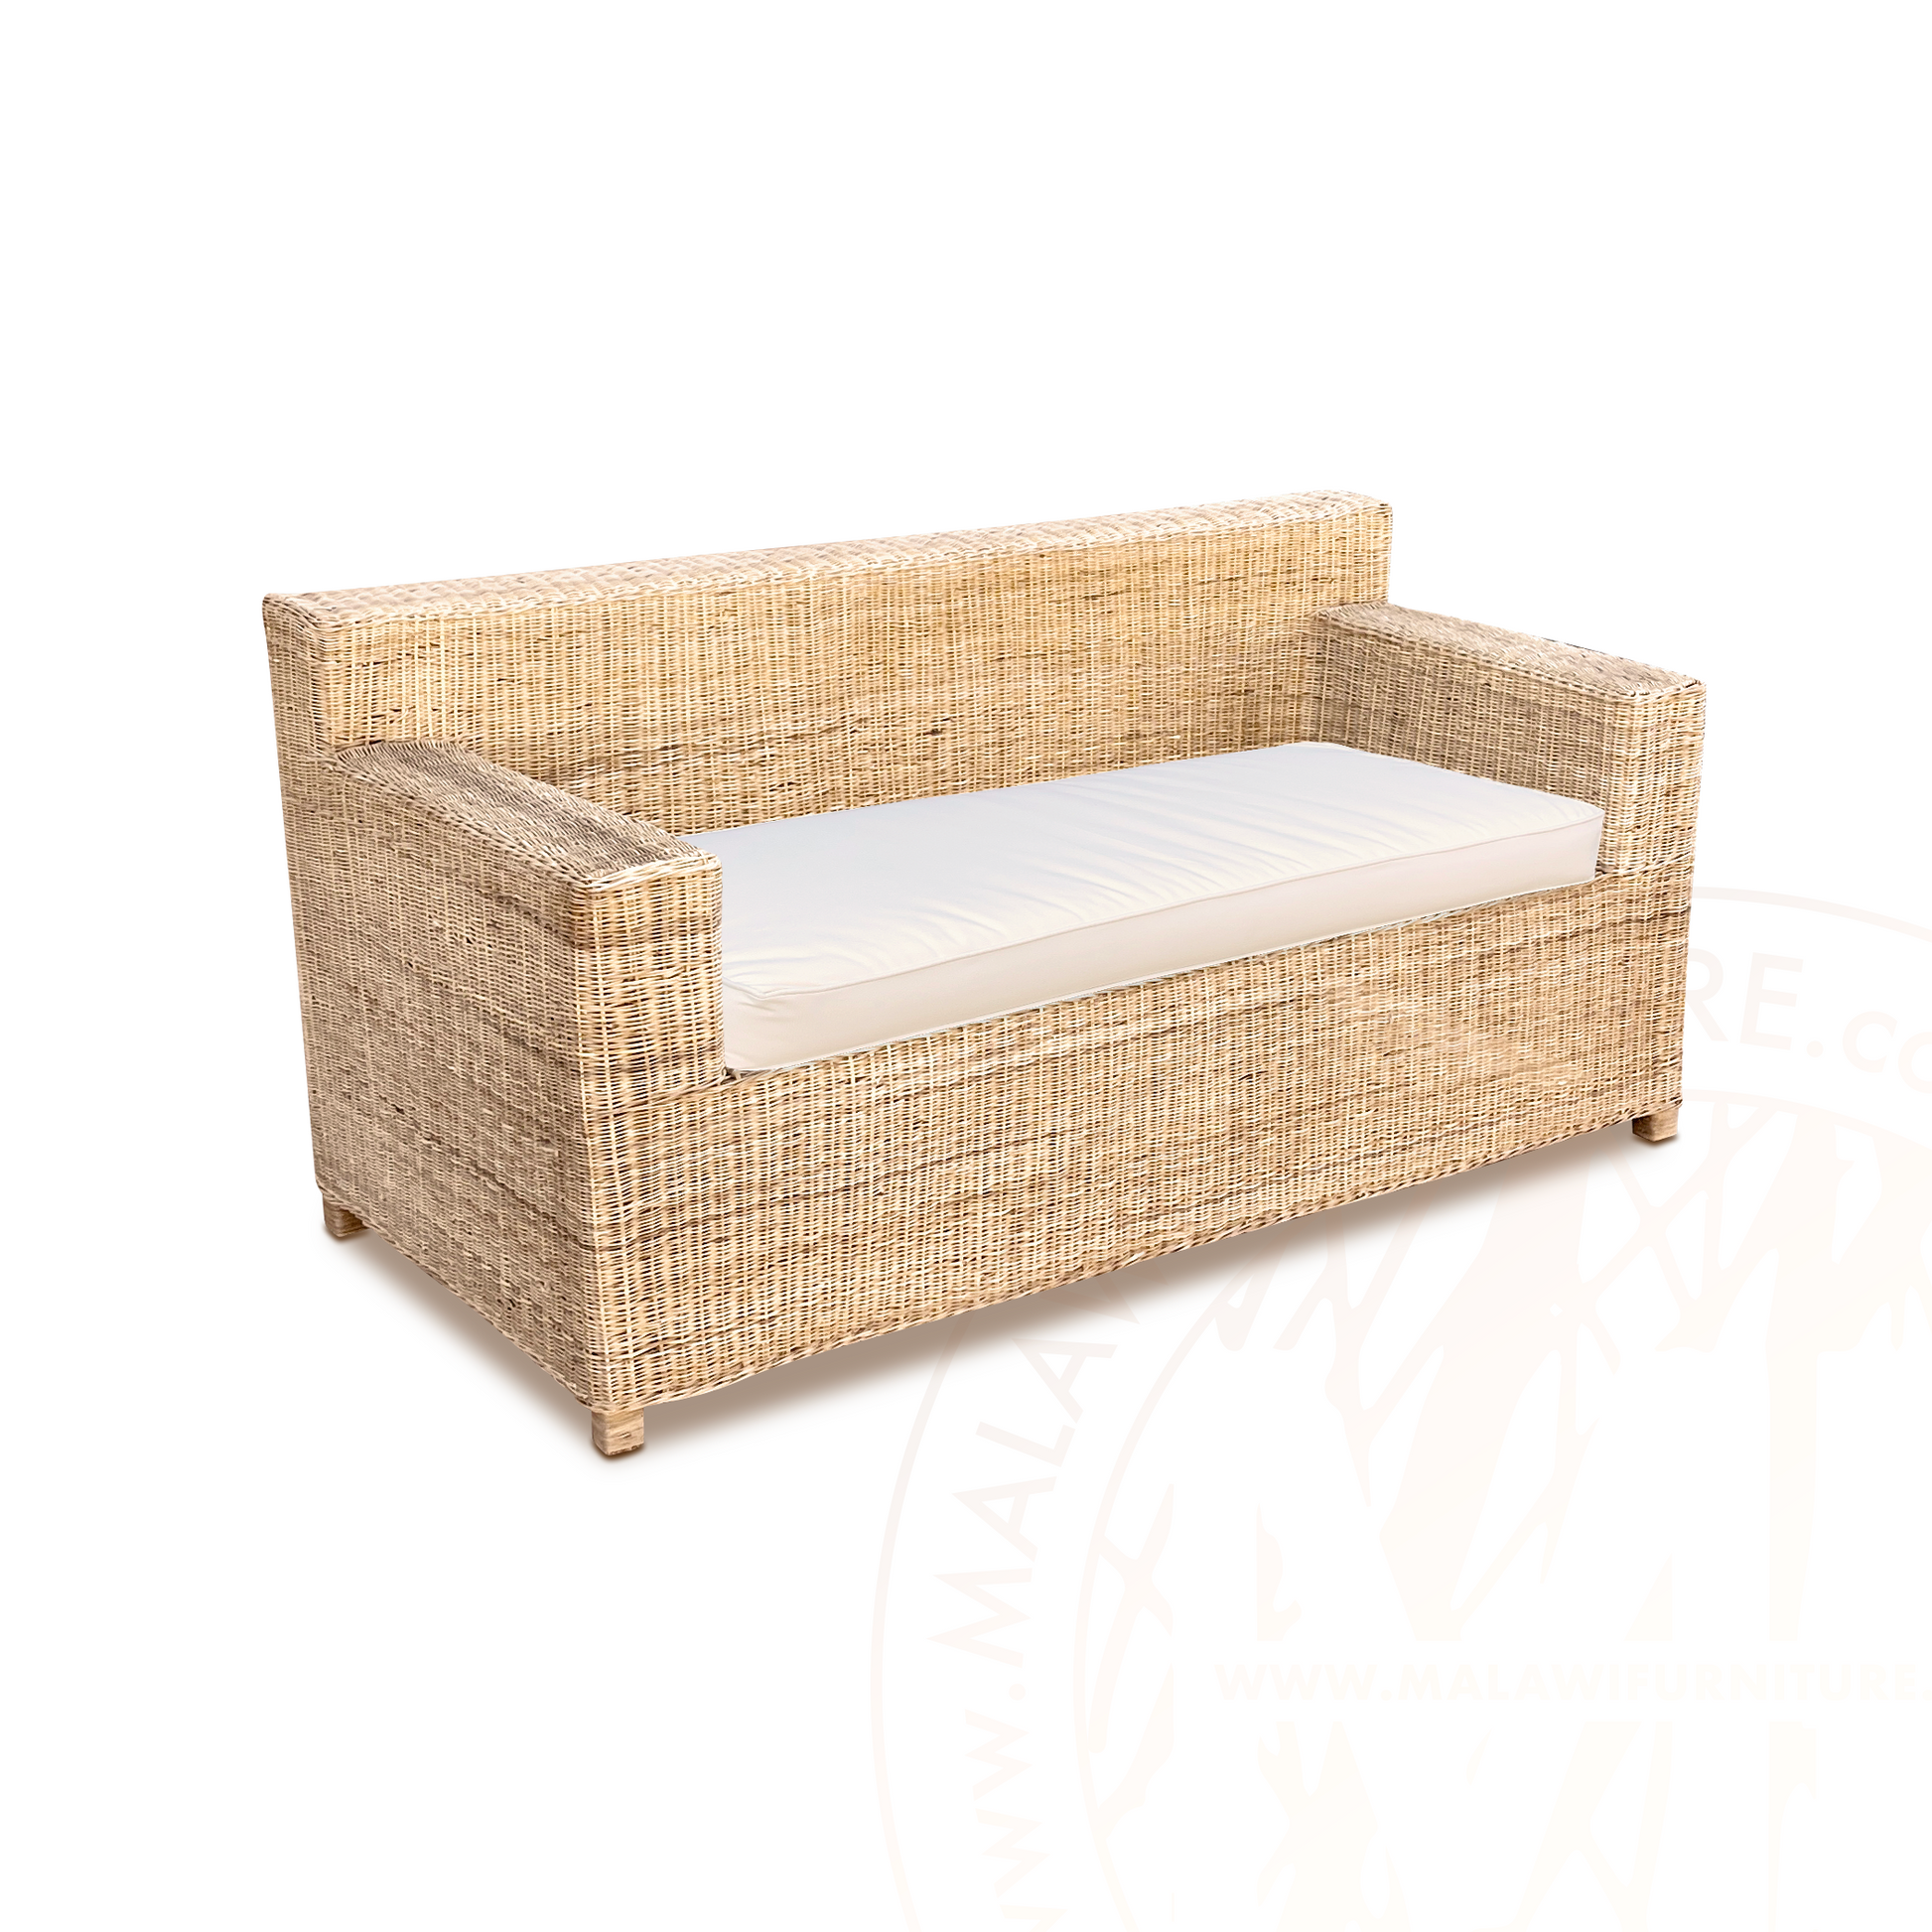 BOX Malawi Couch two Seater hand weaved woven rattan cane chair malawi with cushion